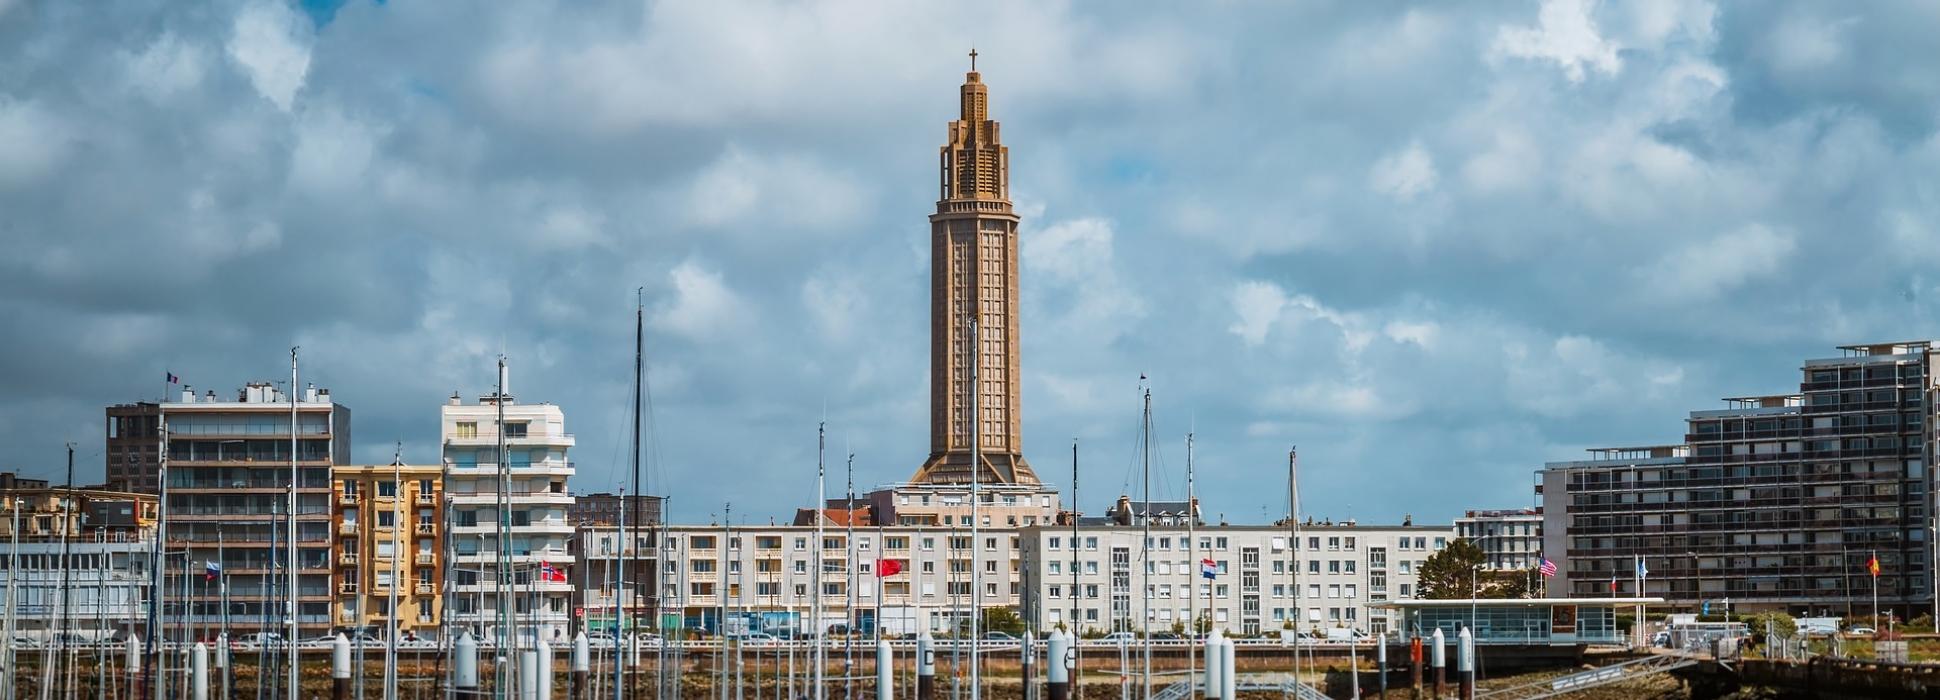 The Smart Appart Group is opening two new residential hotels in Le Havre